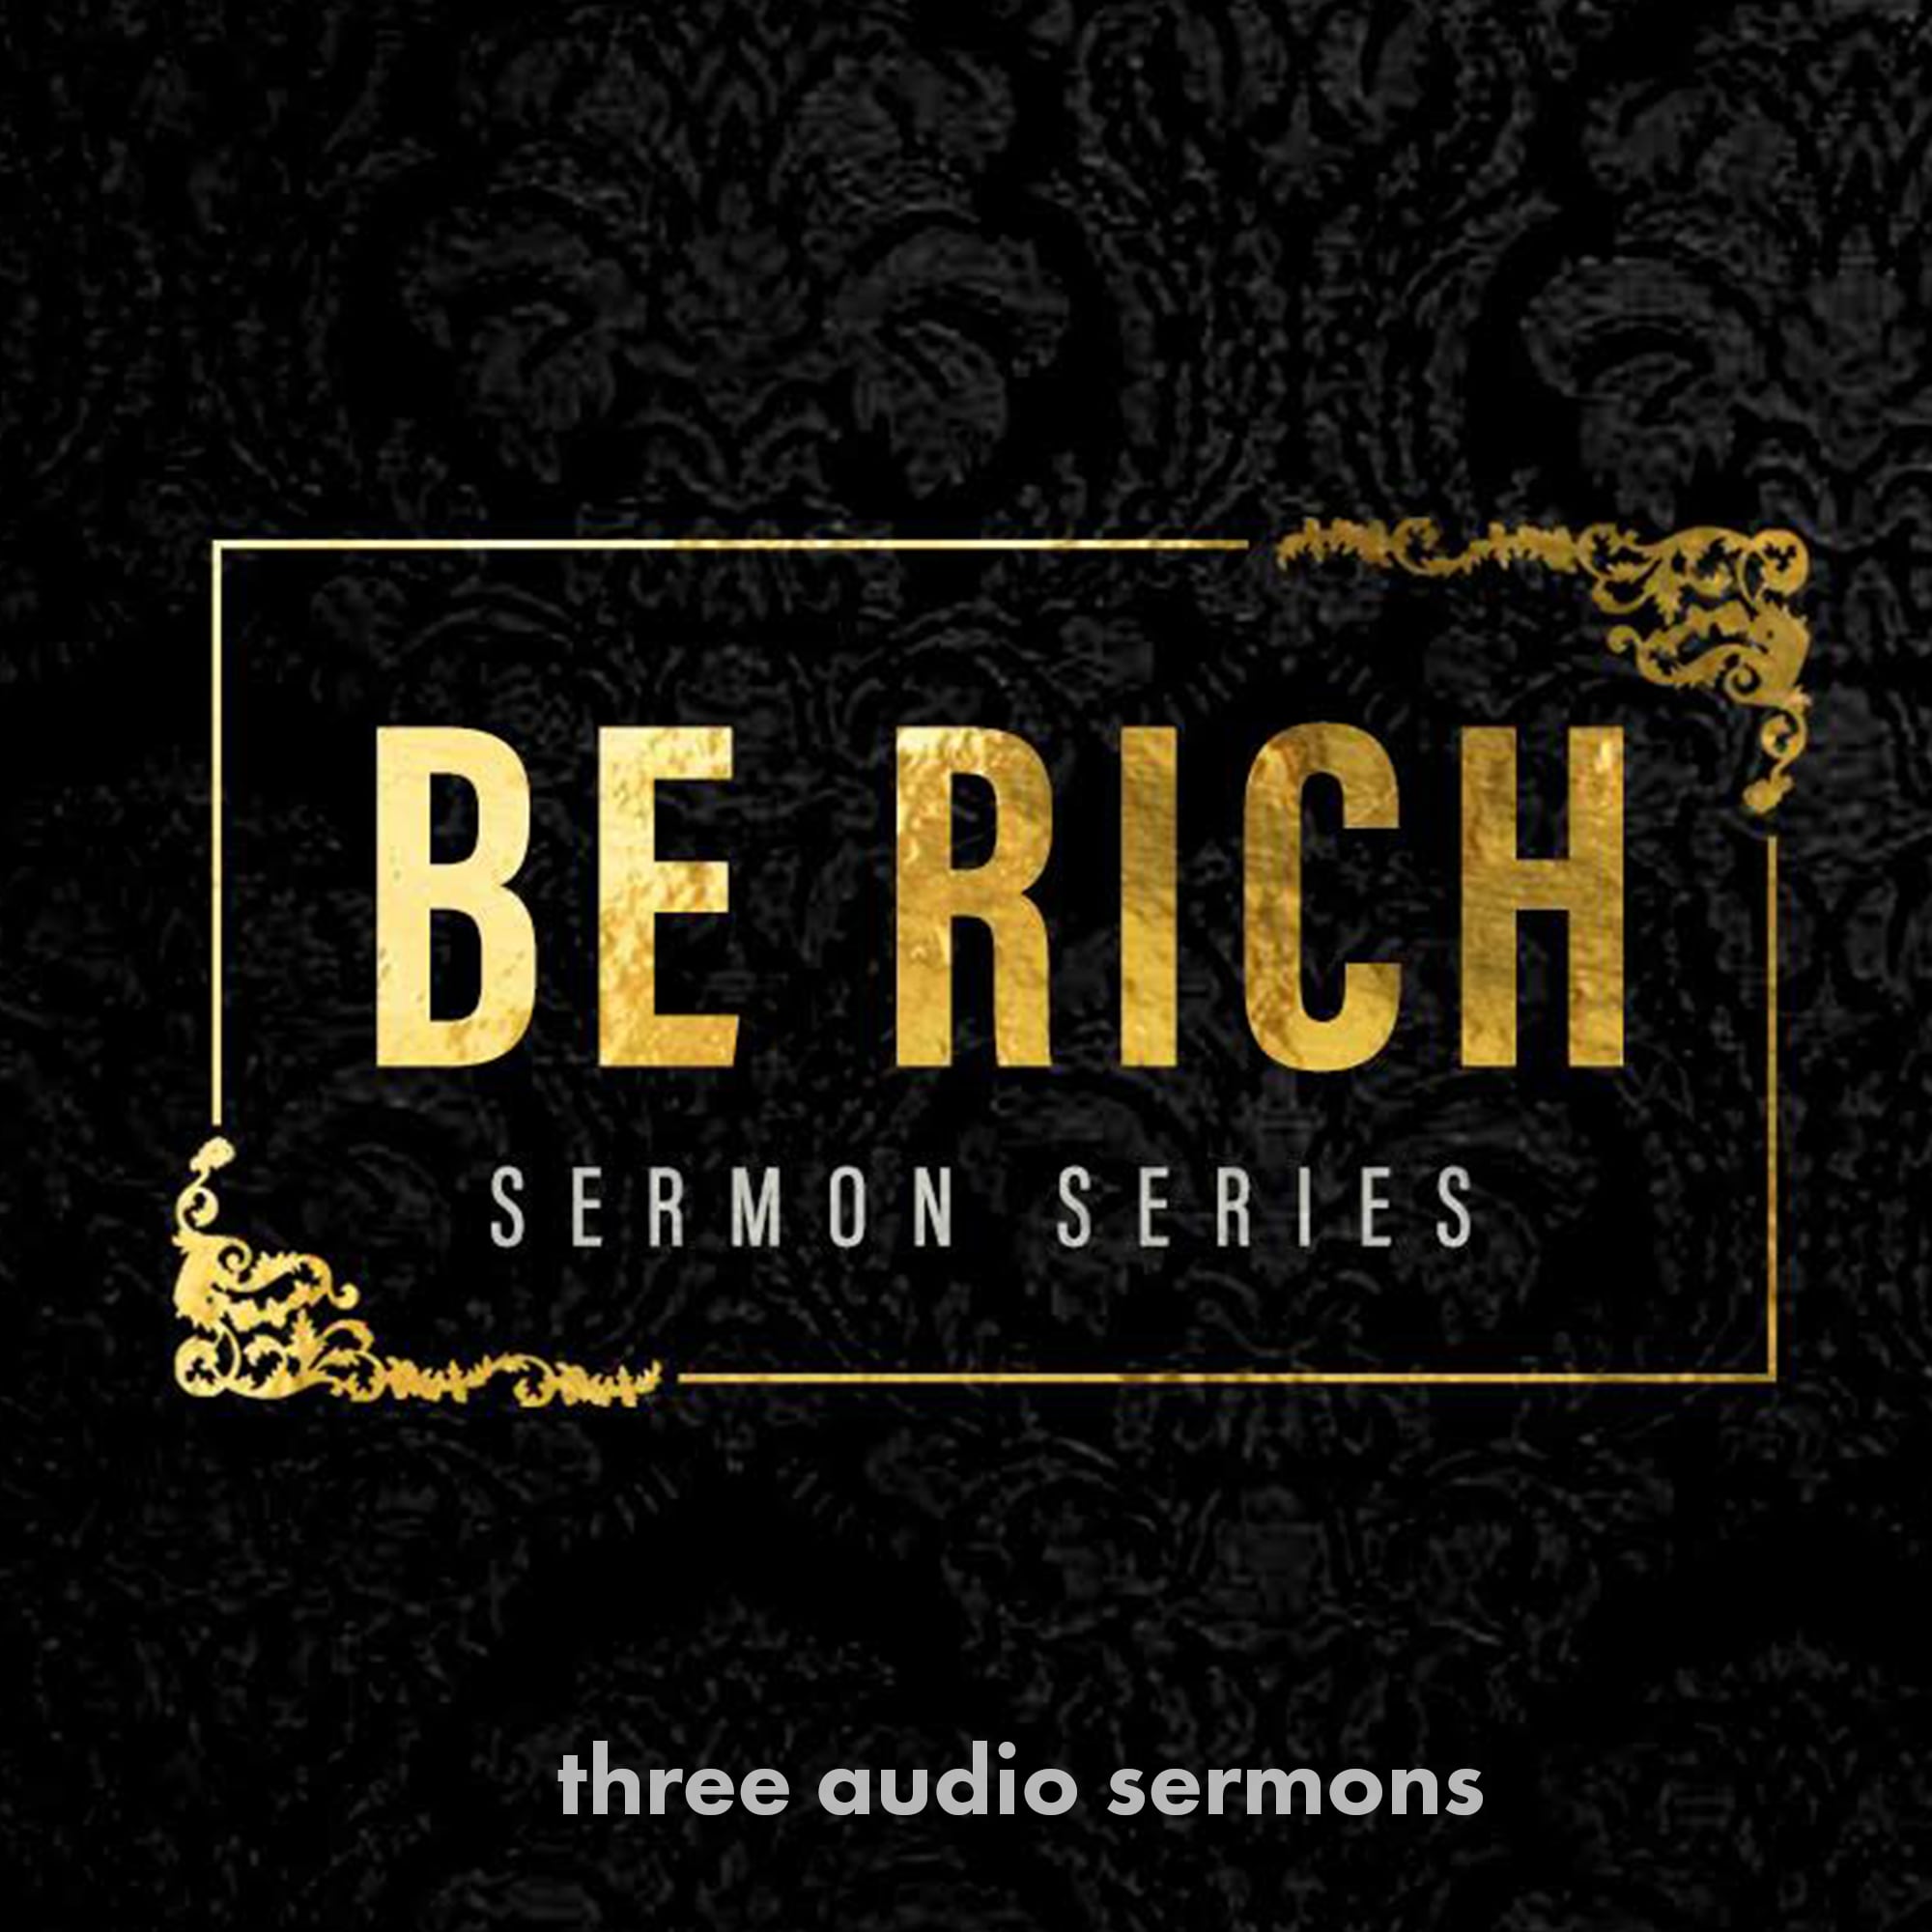 Series: Be Rich